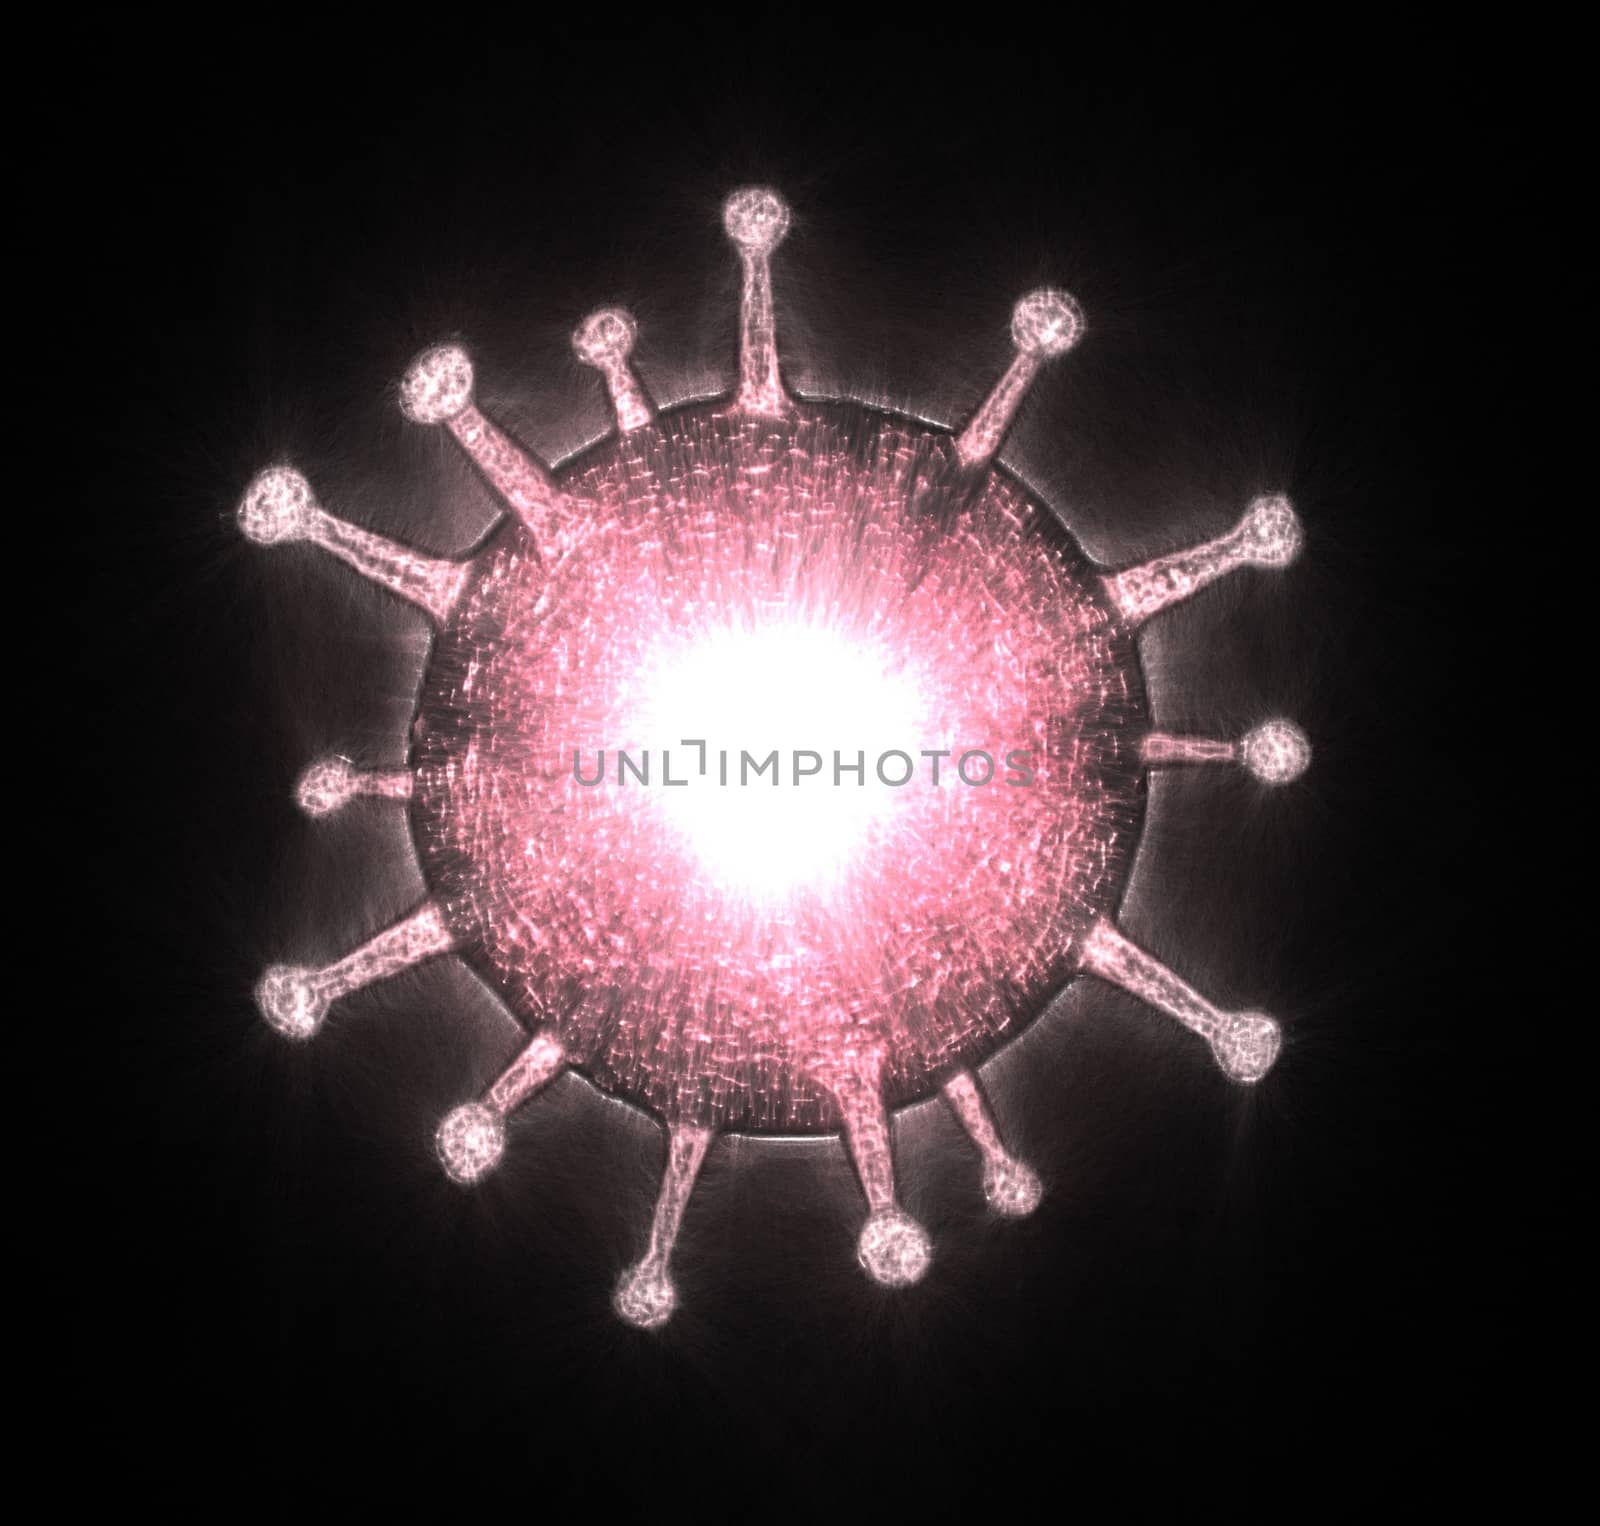 3D-Illustration of some corona virus with kirlian aura and sketc by MP_foto71